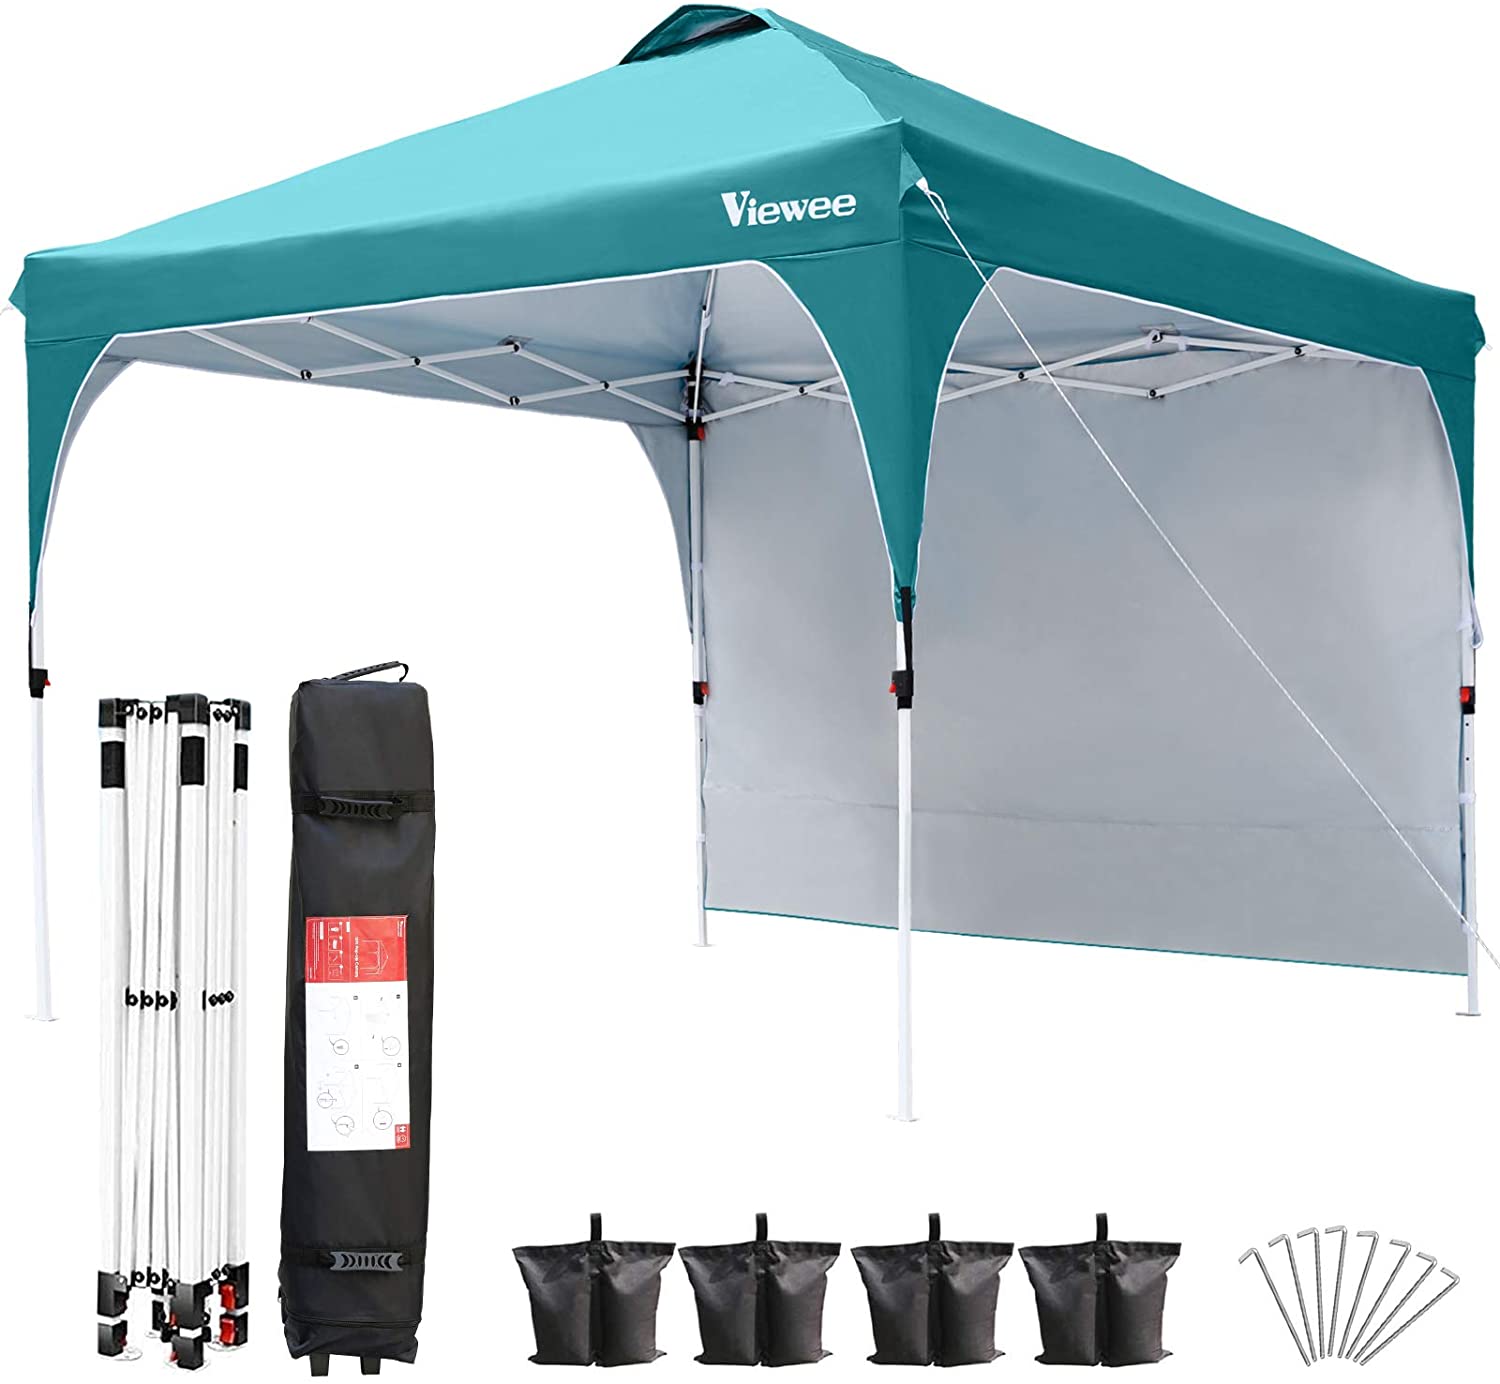 Photo 1 of Viewee Canopy Tent with Side Wall 10 x 10 AntiUV Popup Canopy Impermeable Shelter Canopy Adjustable Height Outdoor Tent with Wheeled Carrying Bag and 4 Fixed Sandbags